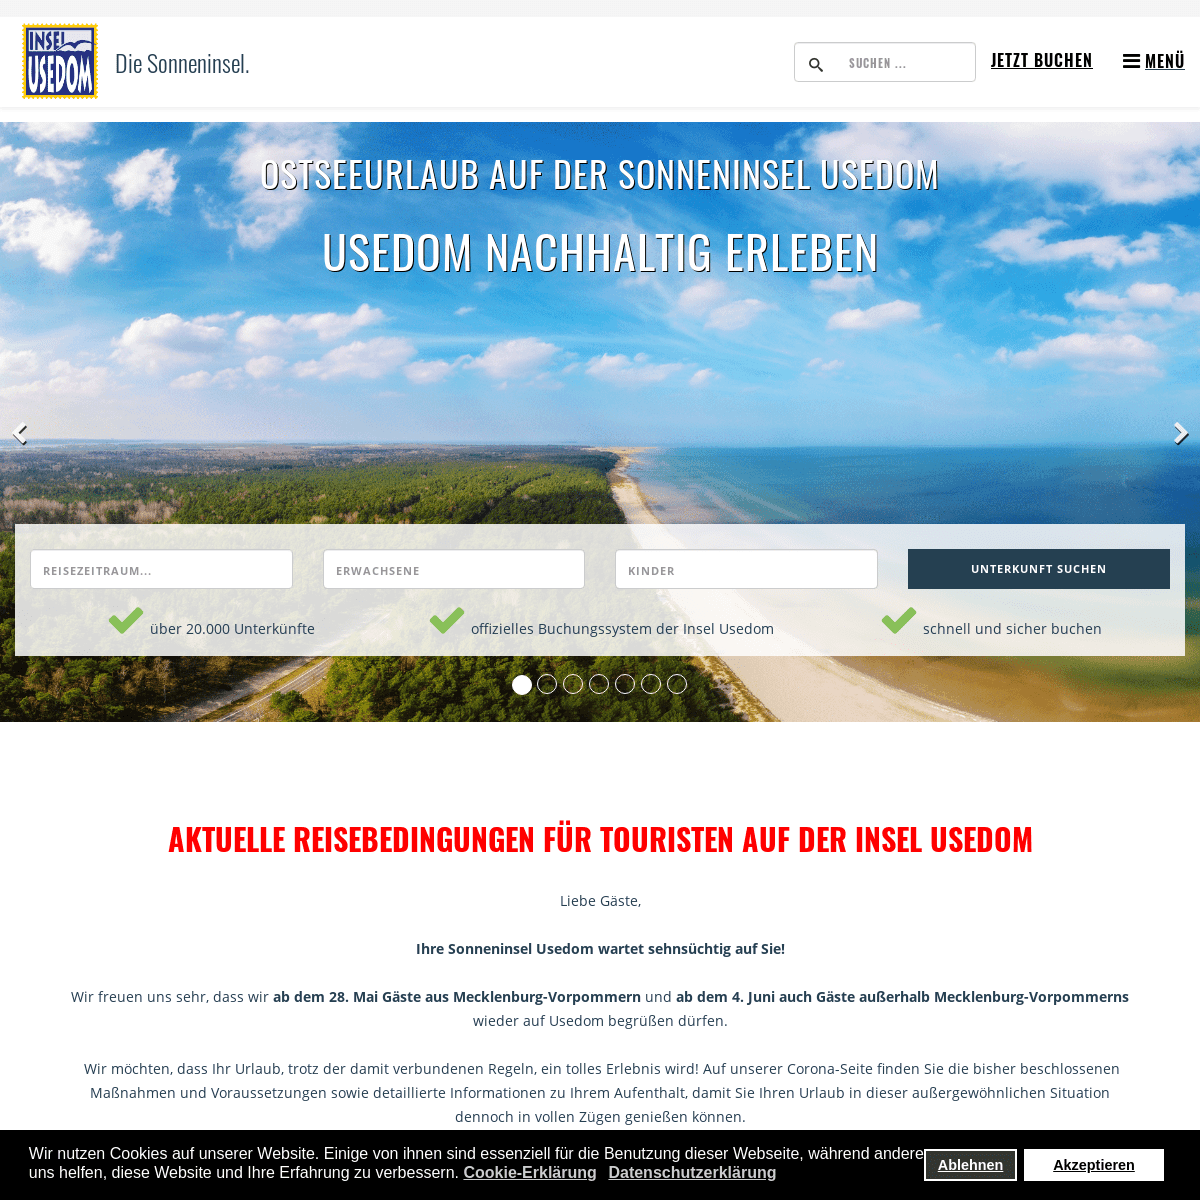 A complete backup of https://usedom.de